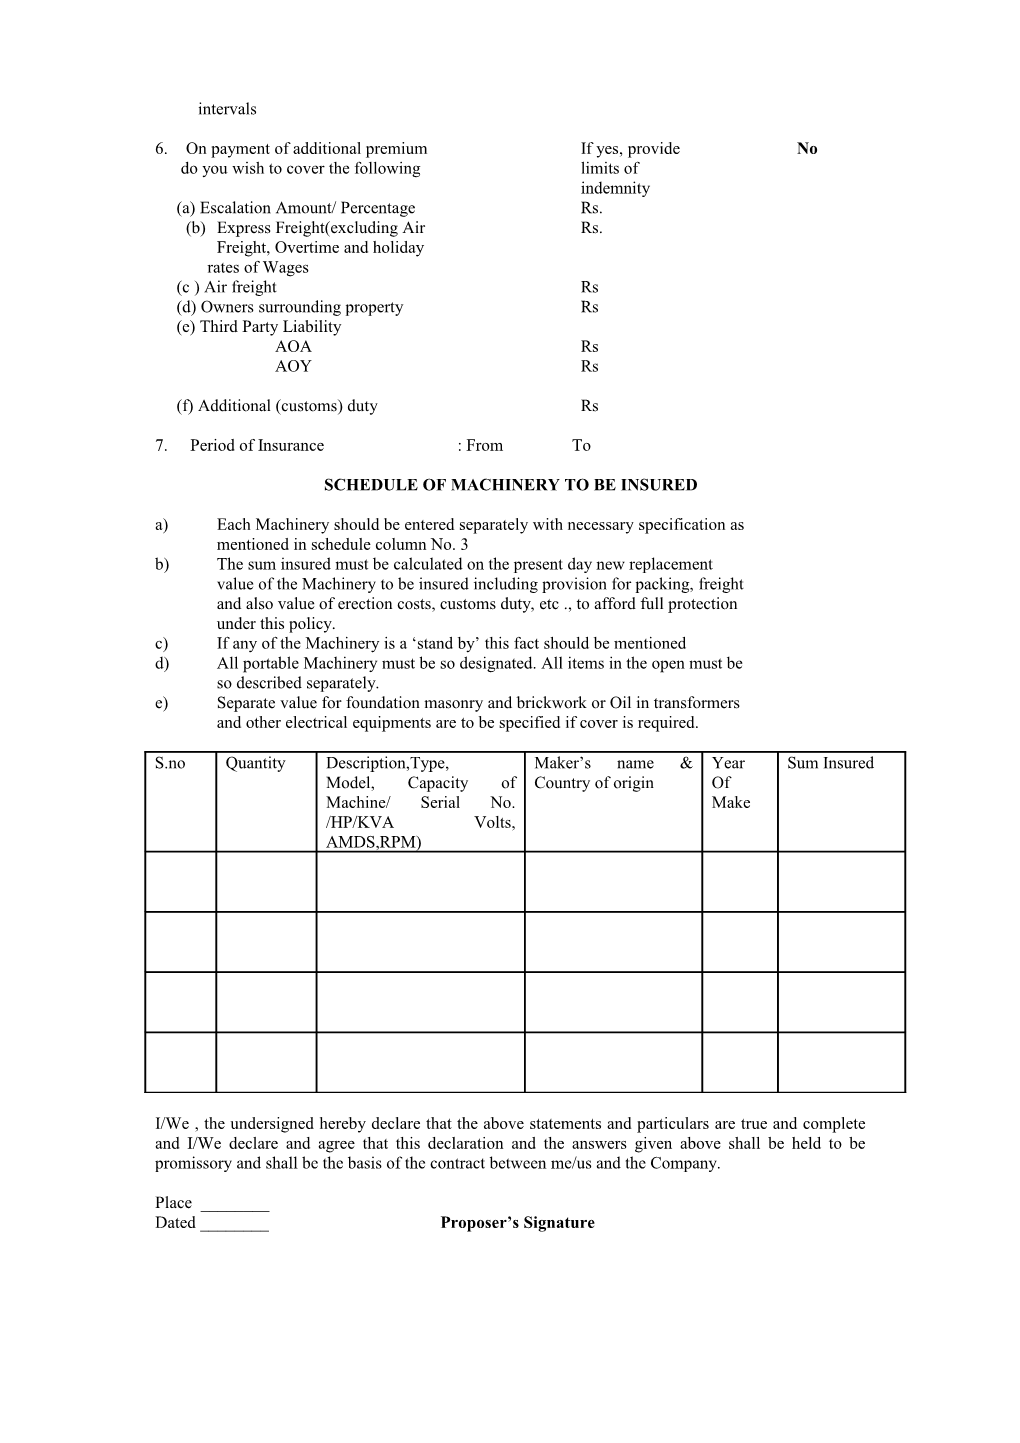 Proposal Form for Machinery Insurance